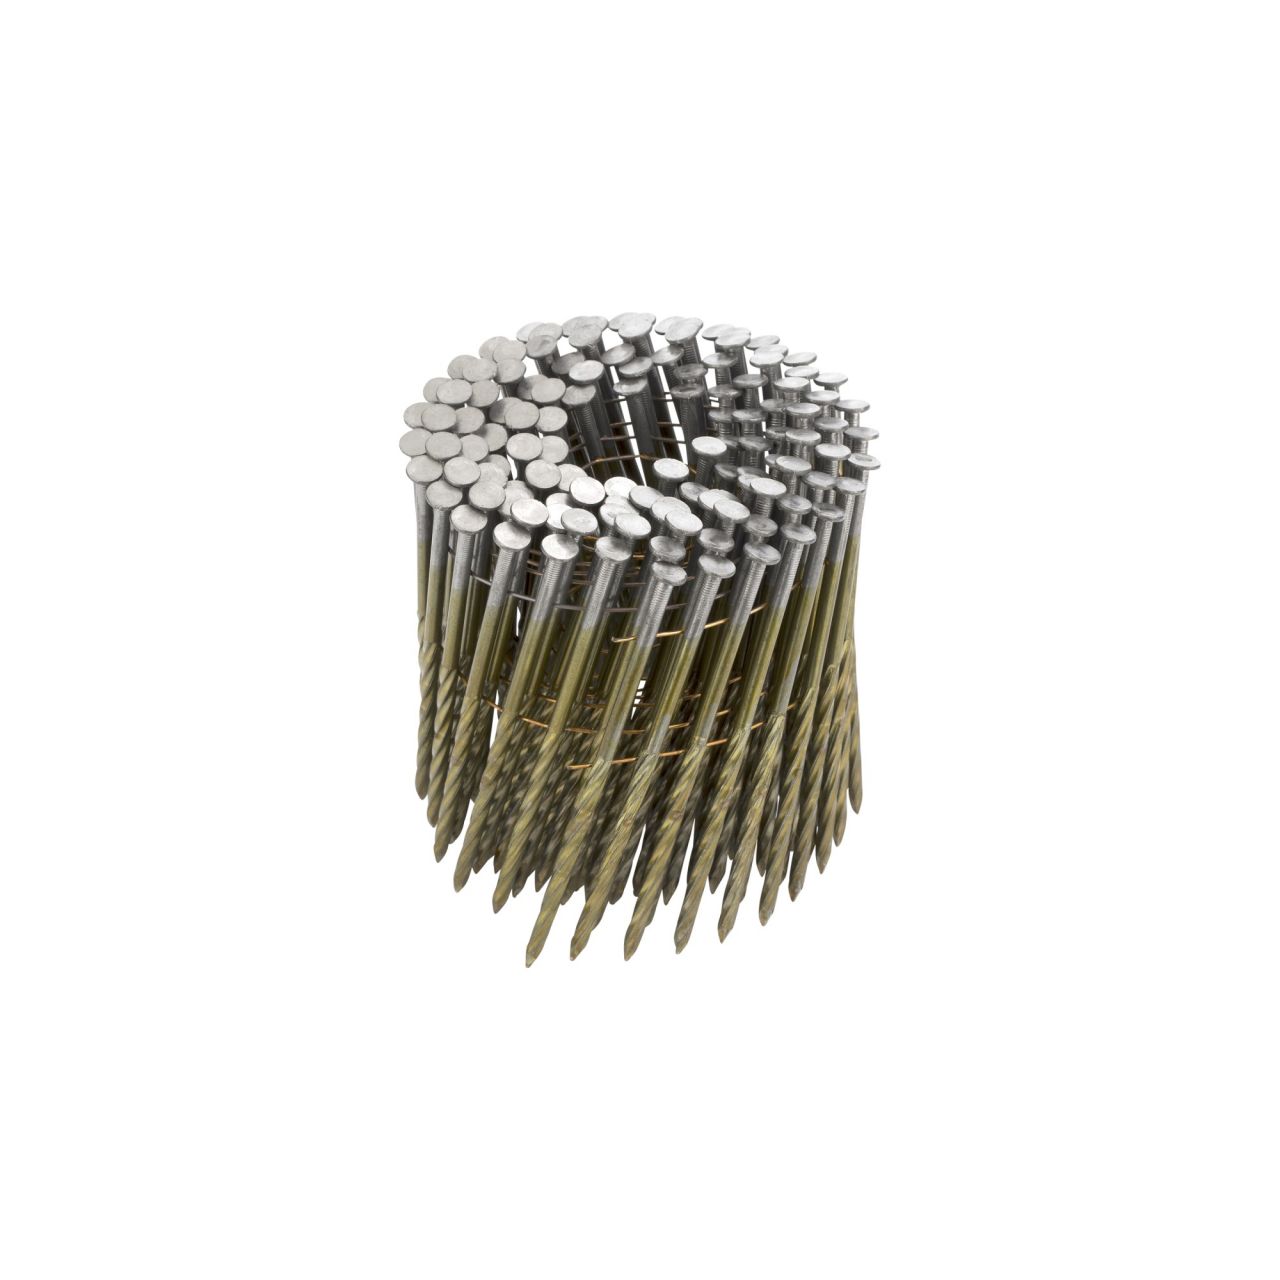 Clavo Coil 3,8 110 mm - Helicoidal / Senc